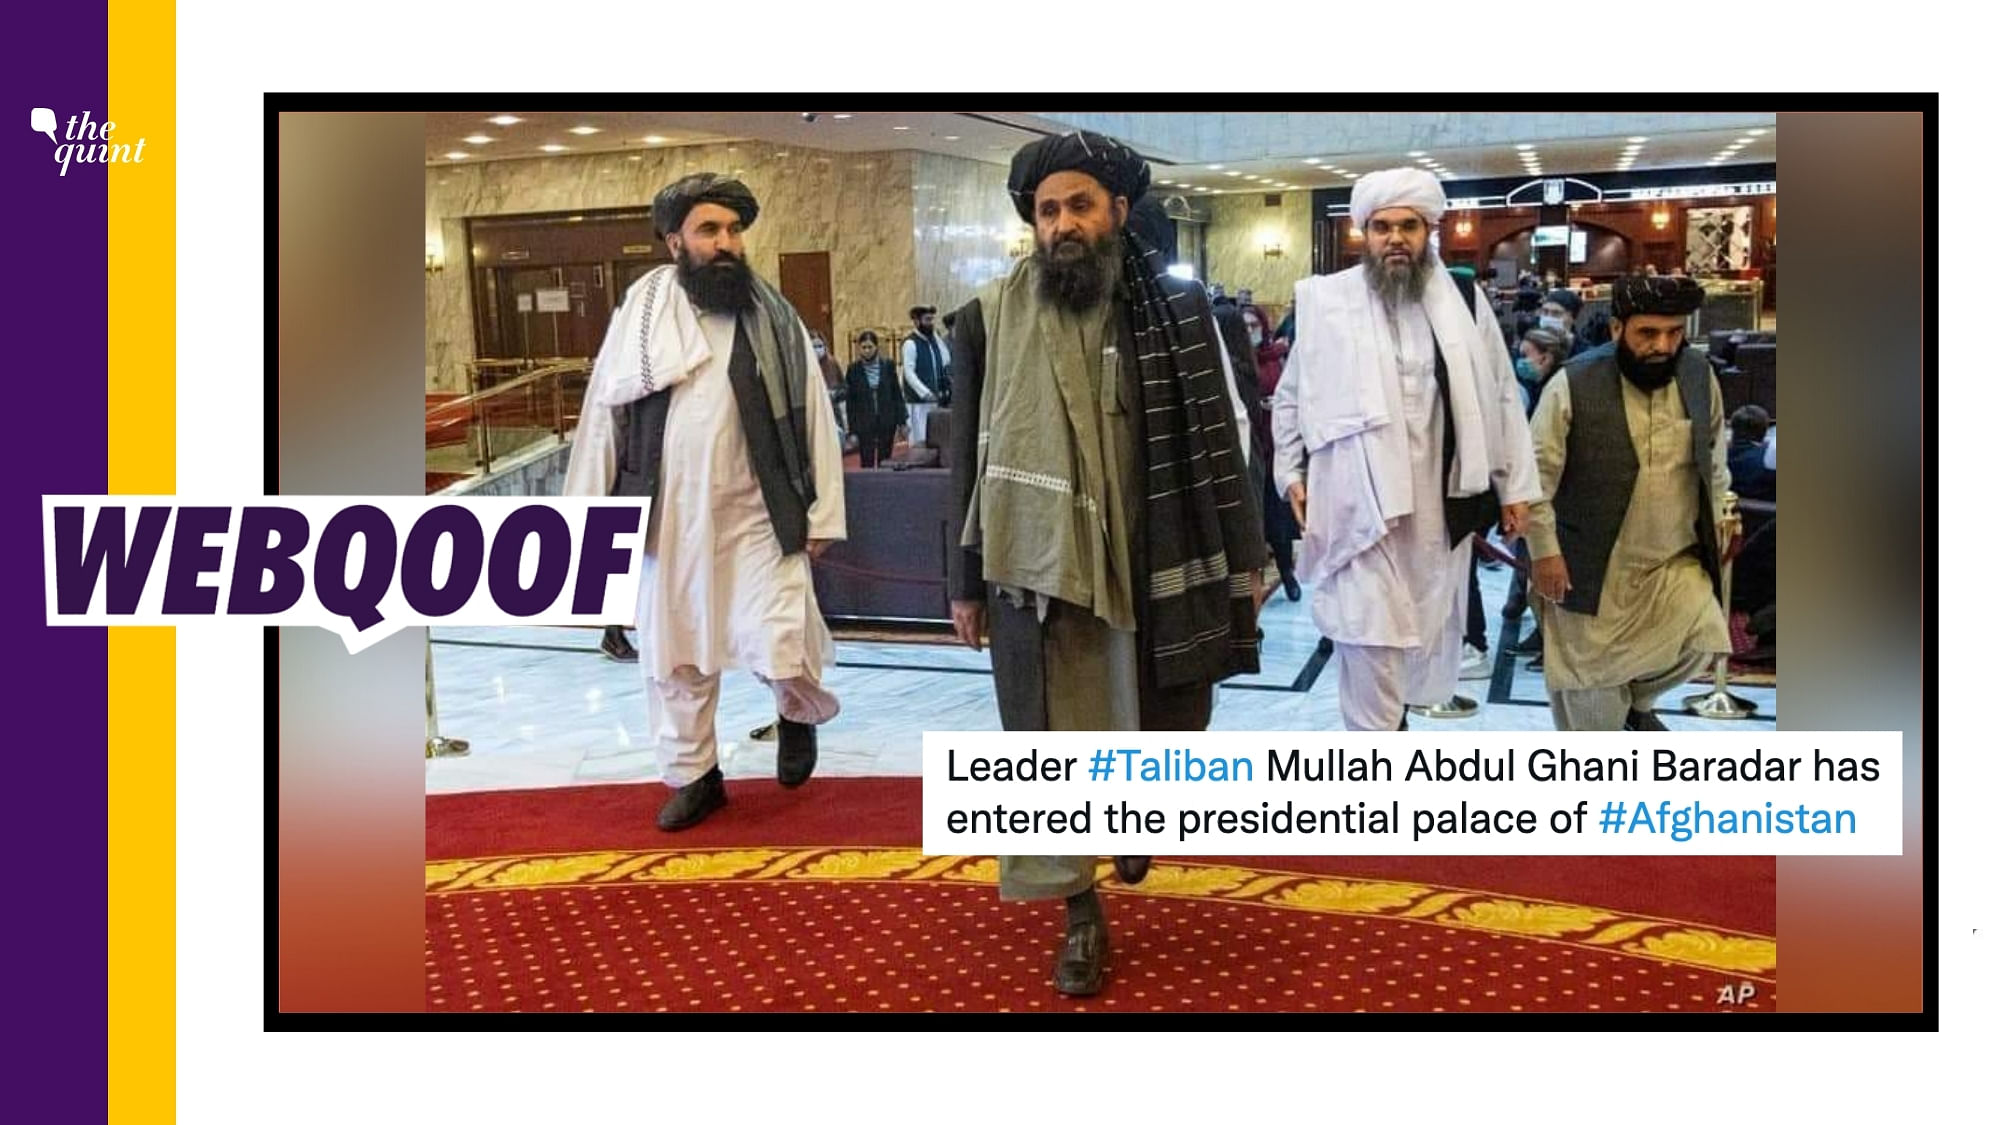 <div class="paragraphs"><p>The photo claims that the Taliban co-founder Mullah Abdul Ghani Baradar has entered the presidential palace in Kabul, Afghanistan.</p></div>